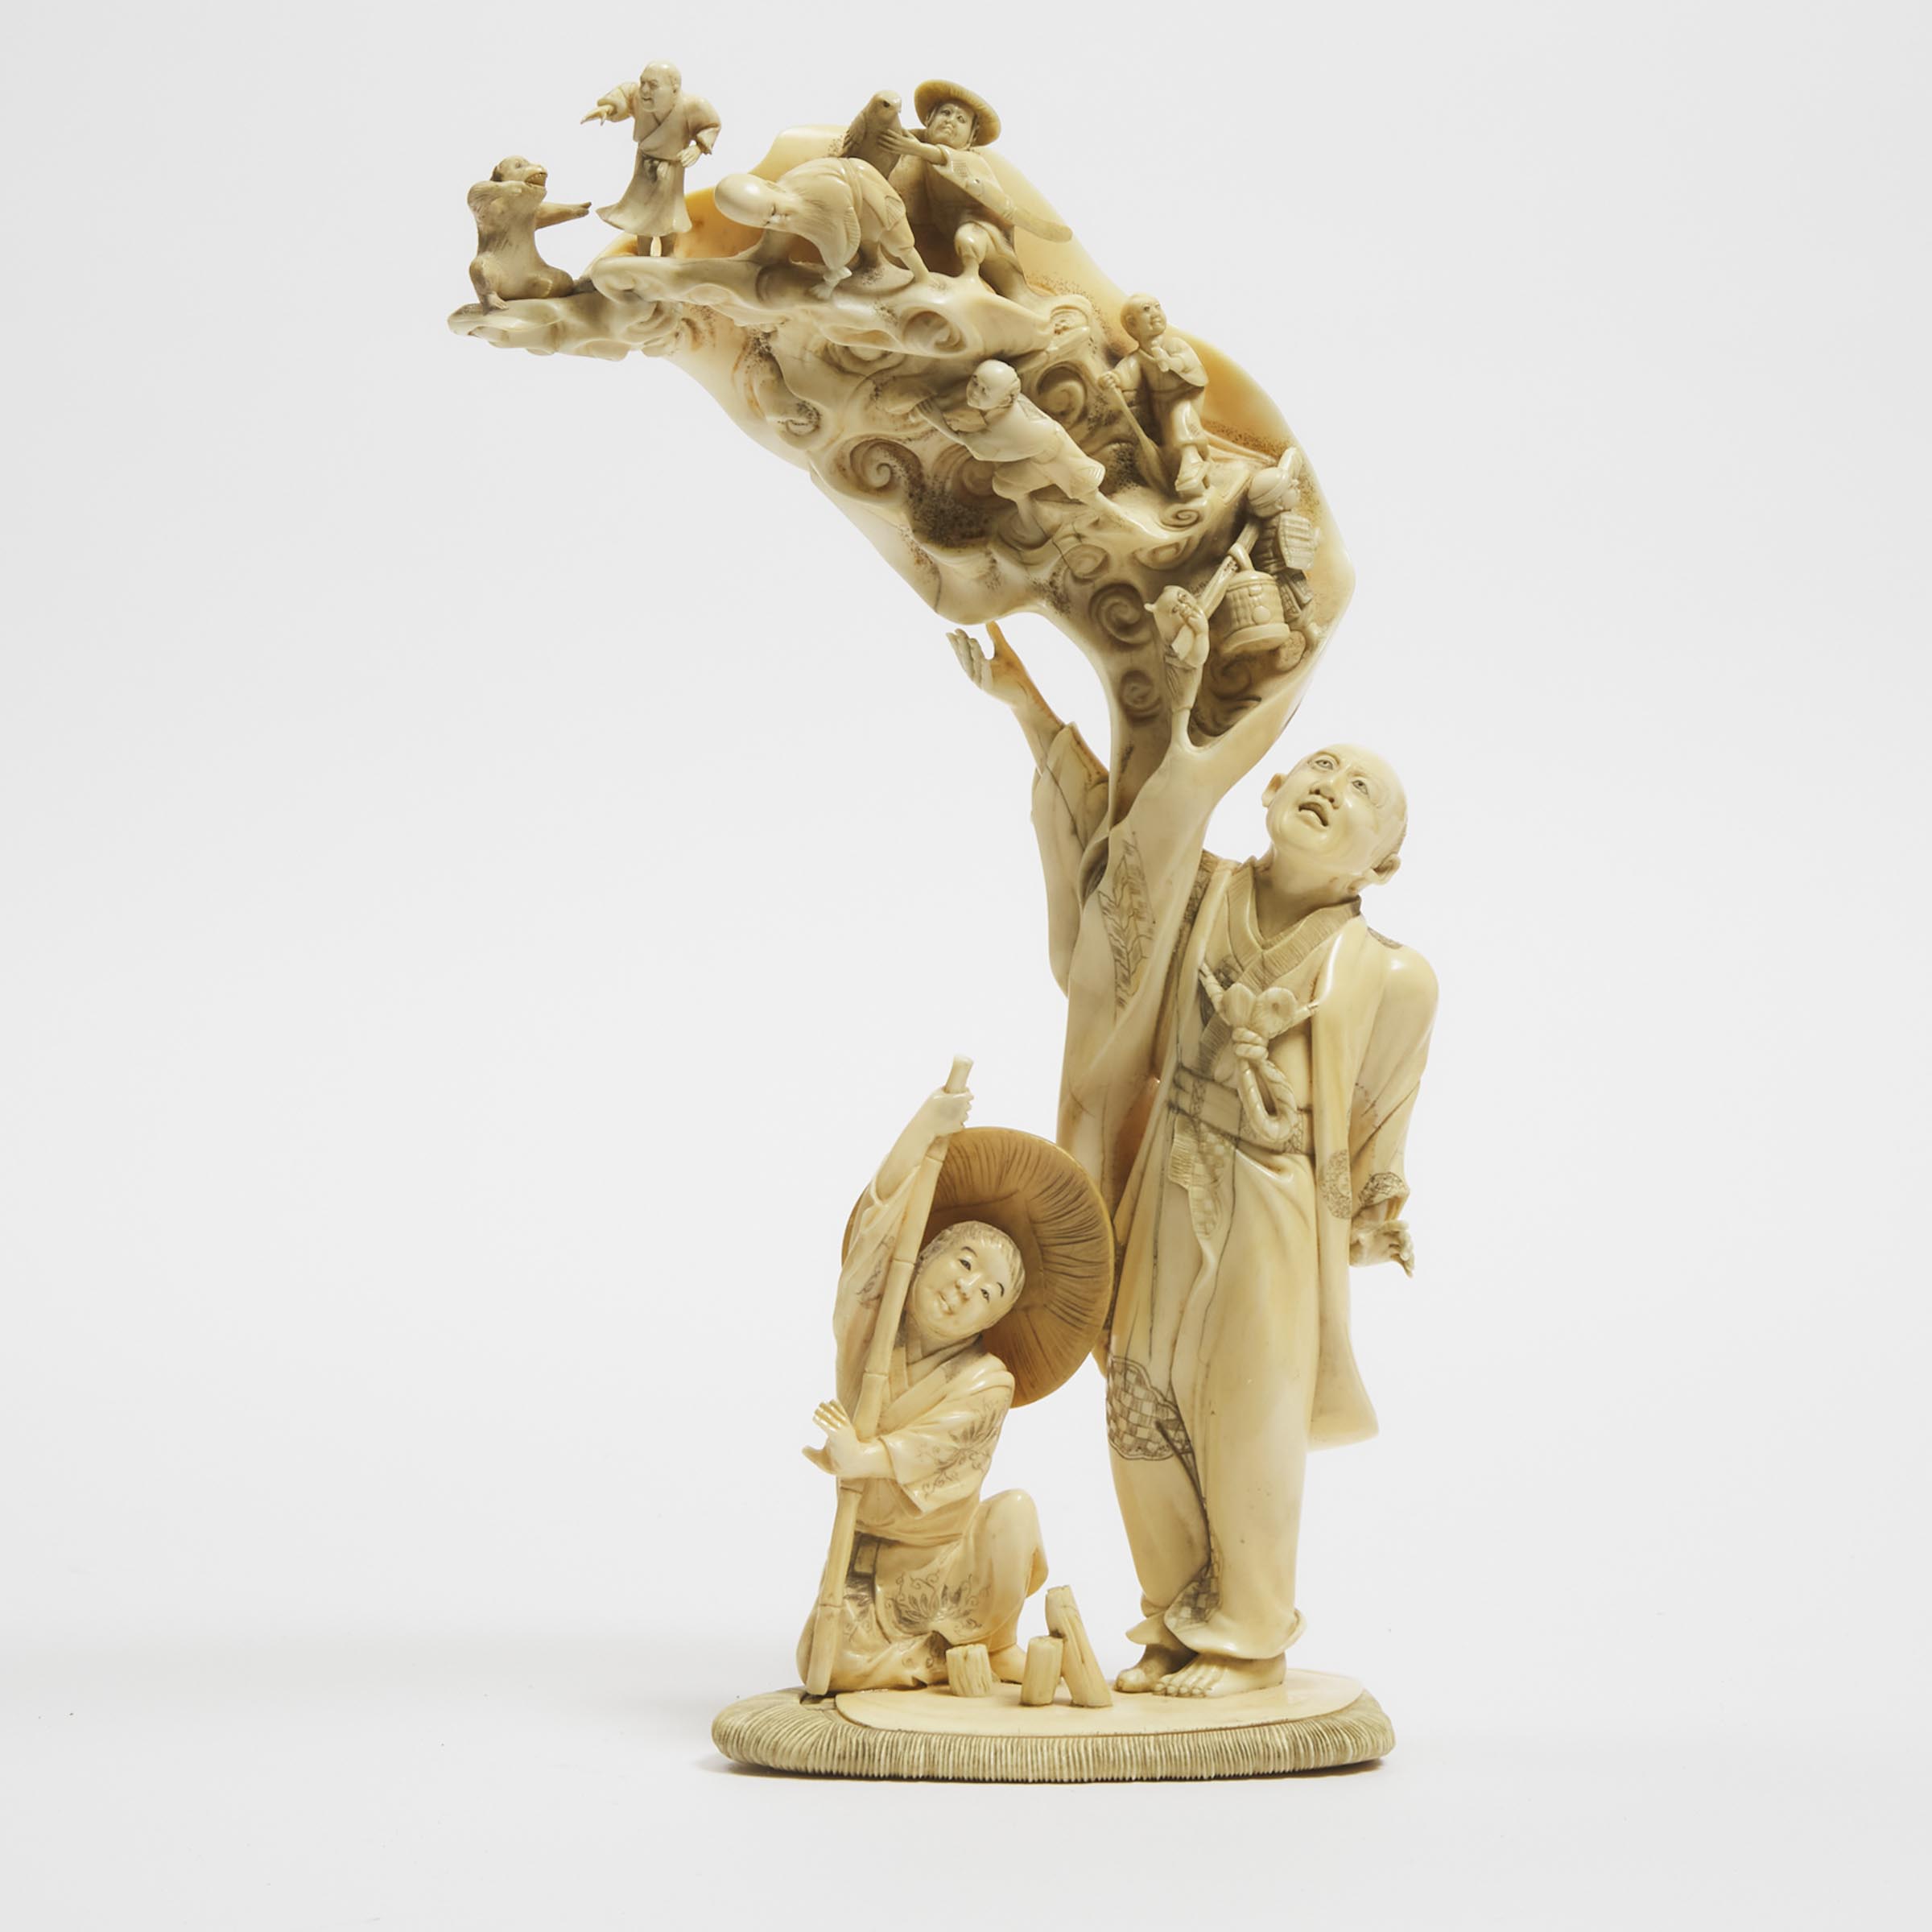 An Ivory Okimono Group of a Dream Sequence, Signed Dogetsu, Meiji Period (1868-1912)